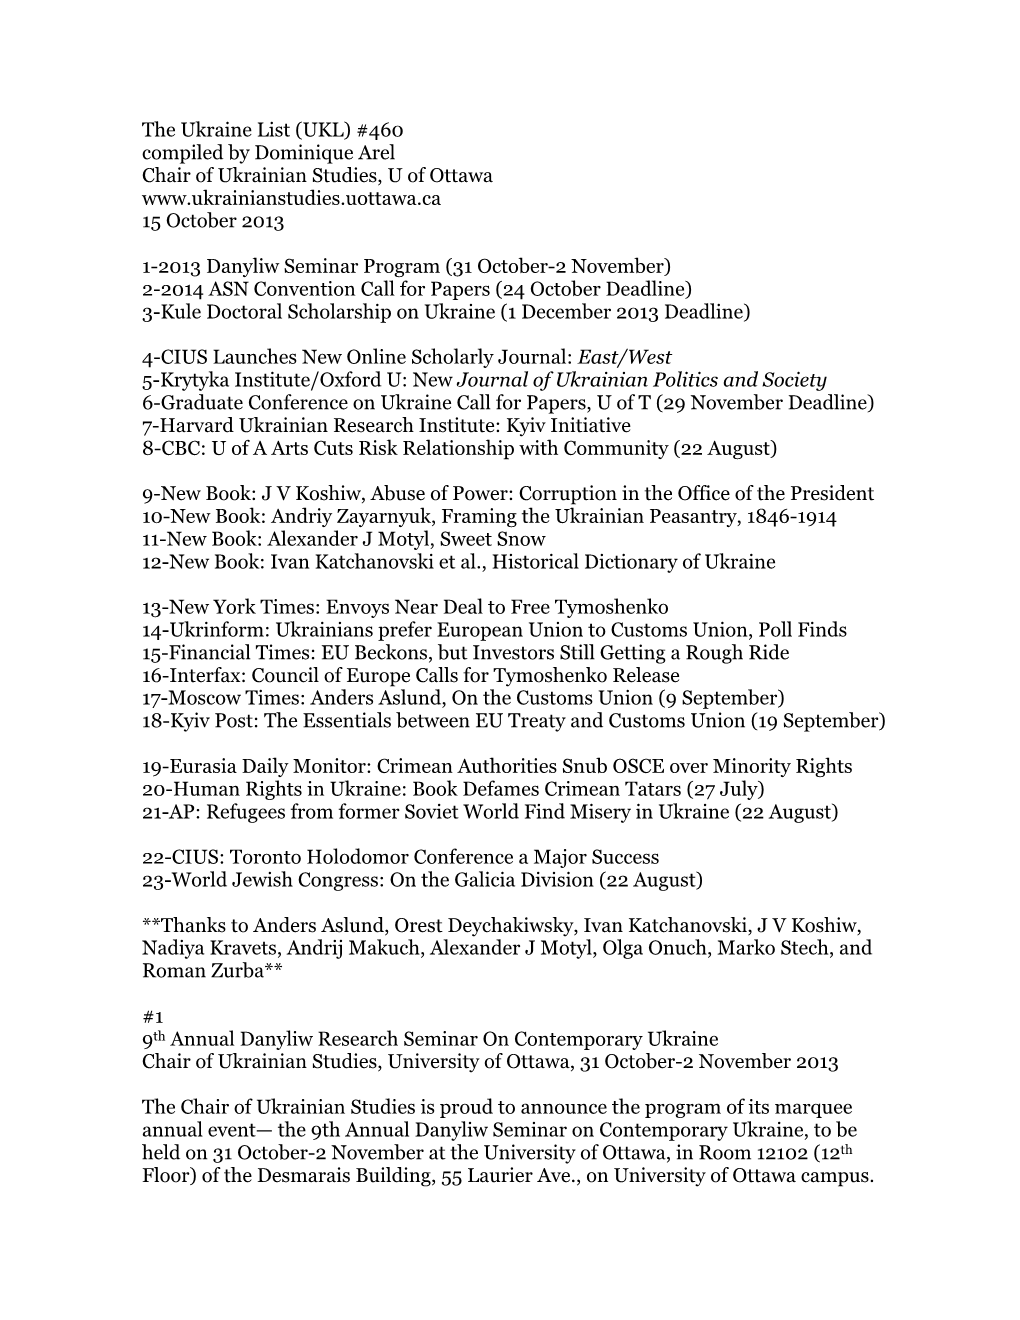 (UKL) #460 Compiled by Dominique Arel Chair of Ukrainian Studies, U of Ottawa 15 October 2013